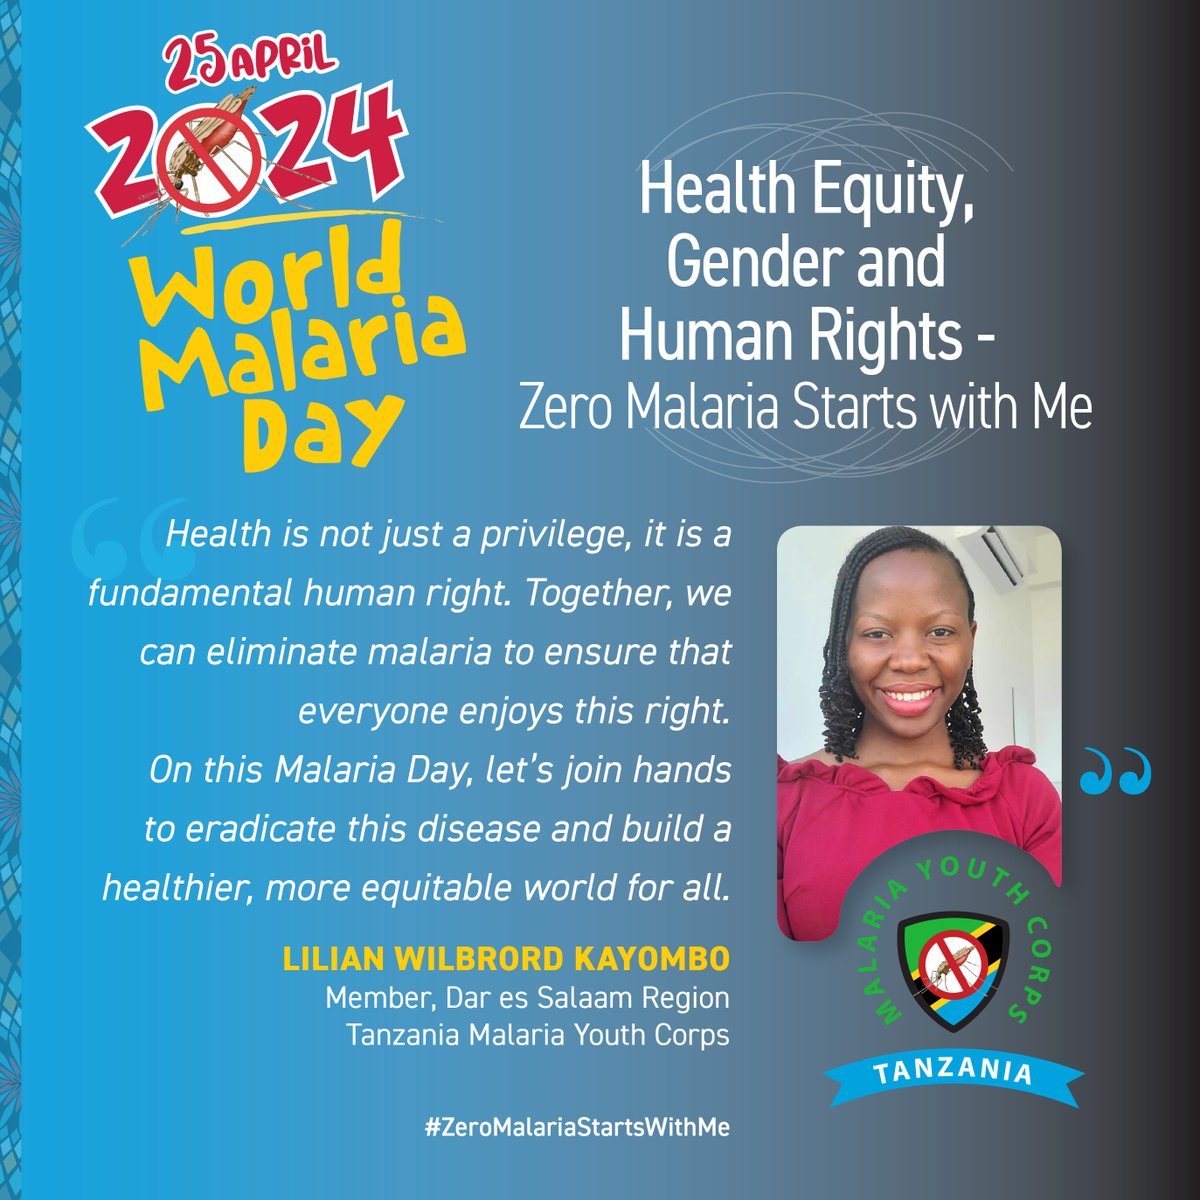 We are marking the #WorldMalariaDay🚫🦟commemorations in just 8 days ‼️ Joining us @LWilbrord , Member of @malariacorpstz , to end malaria is very one's business a long standing disease yet deadly and can be treated for a more equitable world. #Tabora #Tanzania @wizara_afyatz